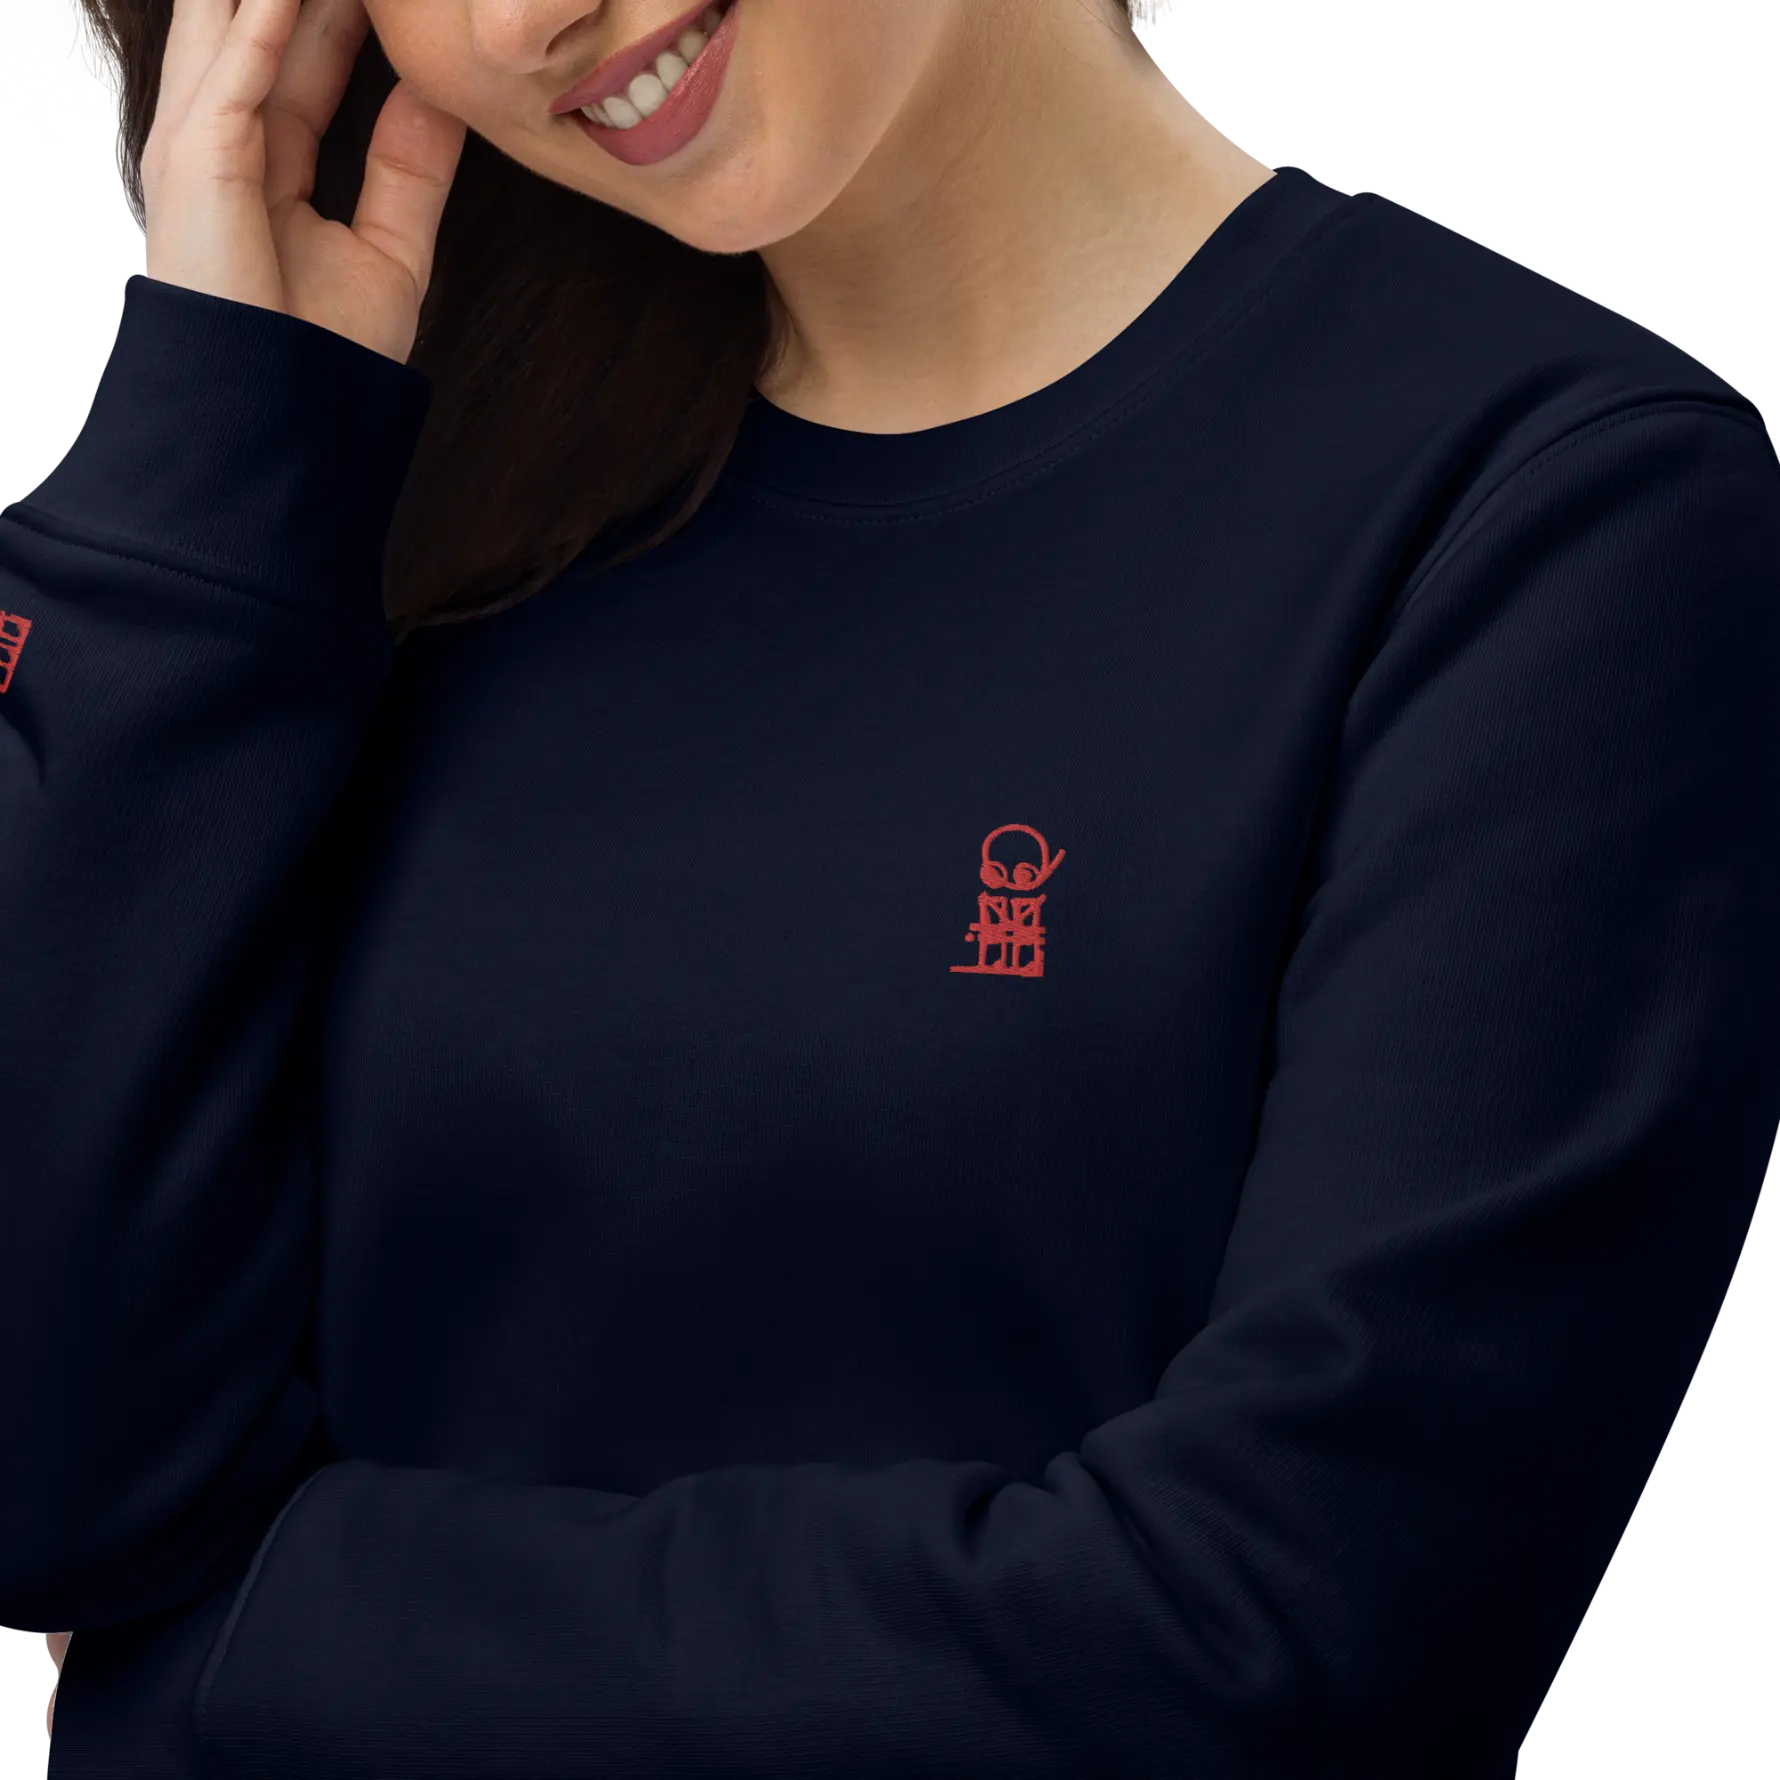 unisex-eco-sweatshirt-french-navy-zoomed-in-3-656d40247b3d4